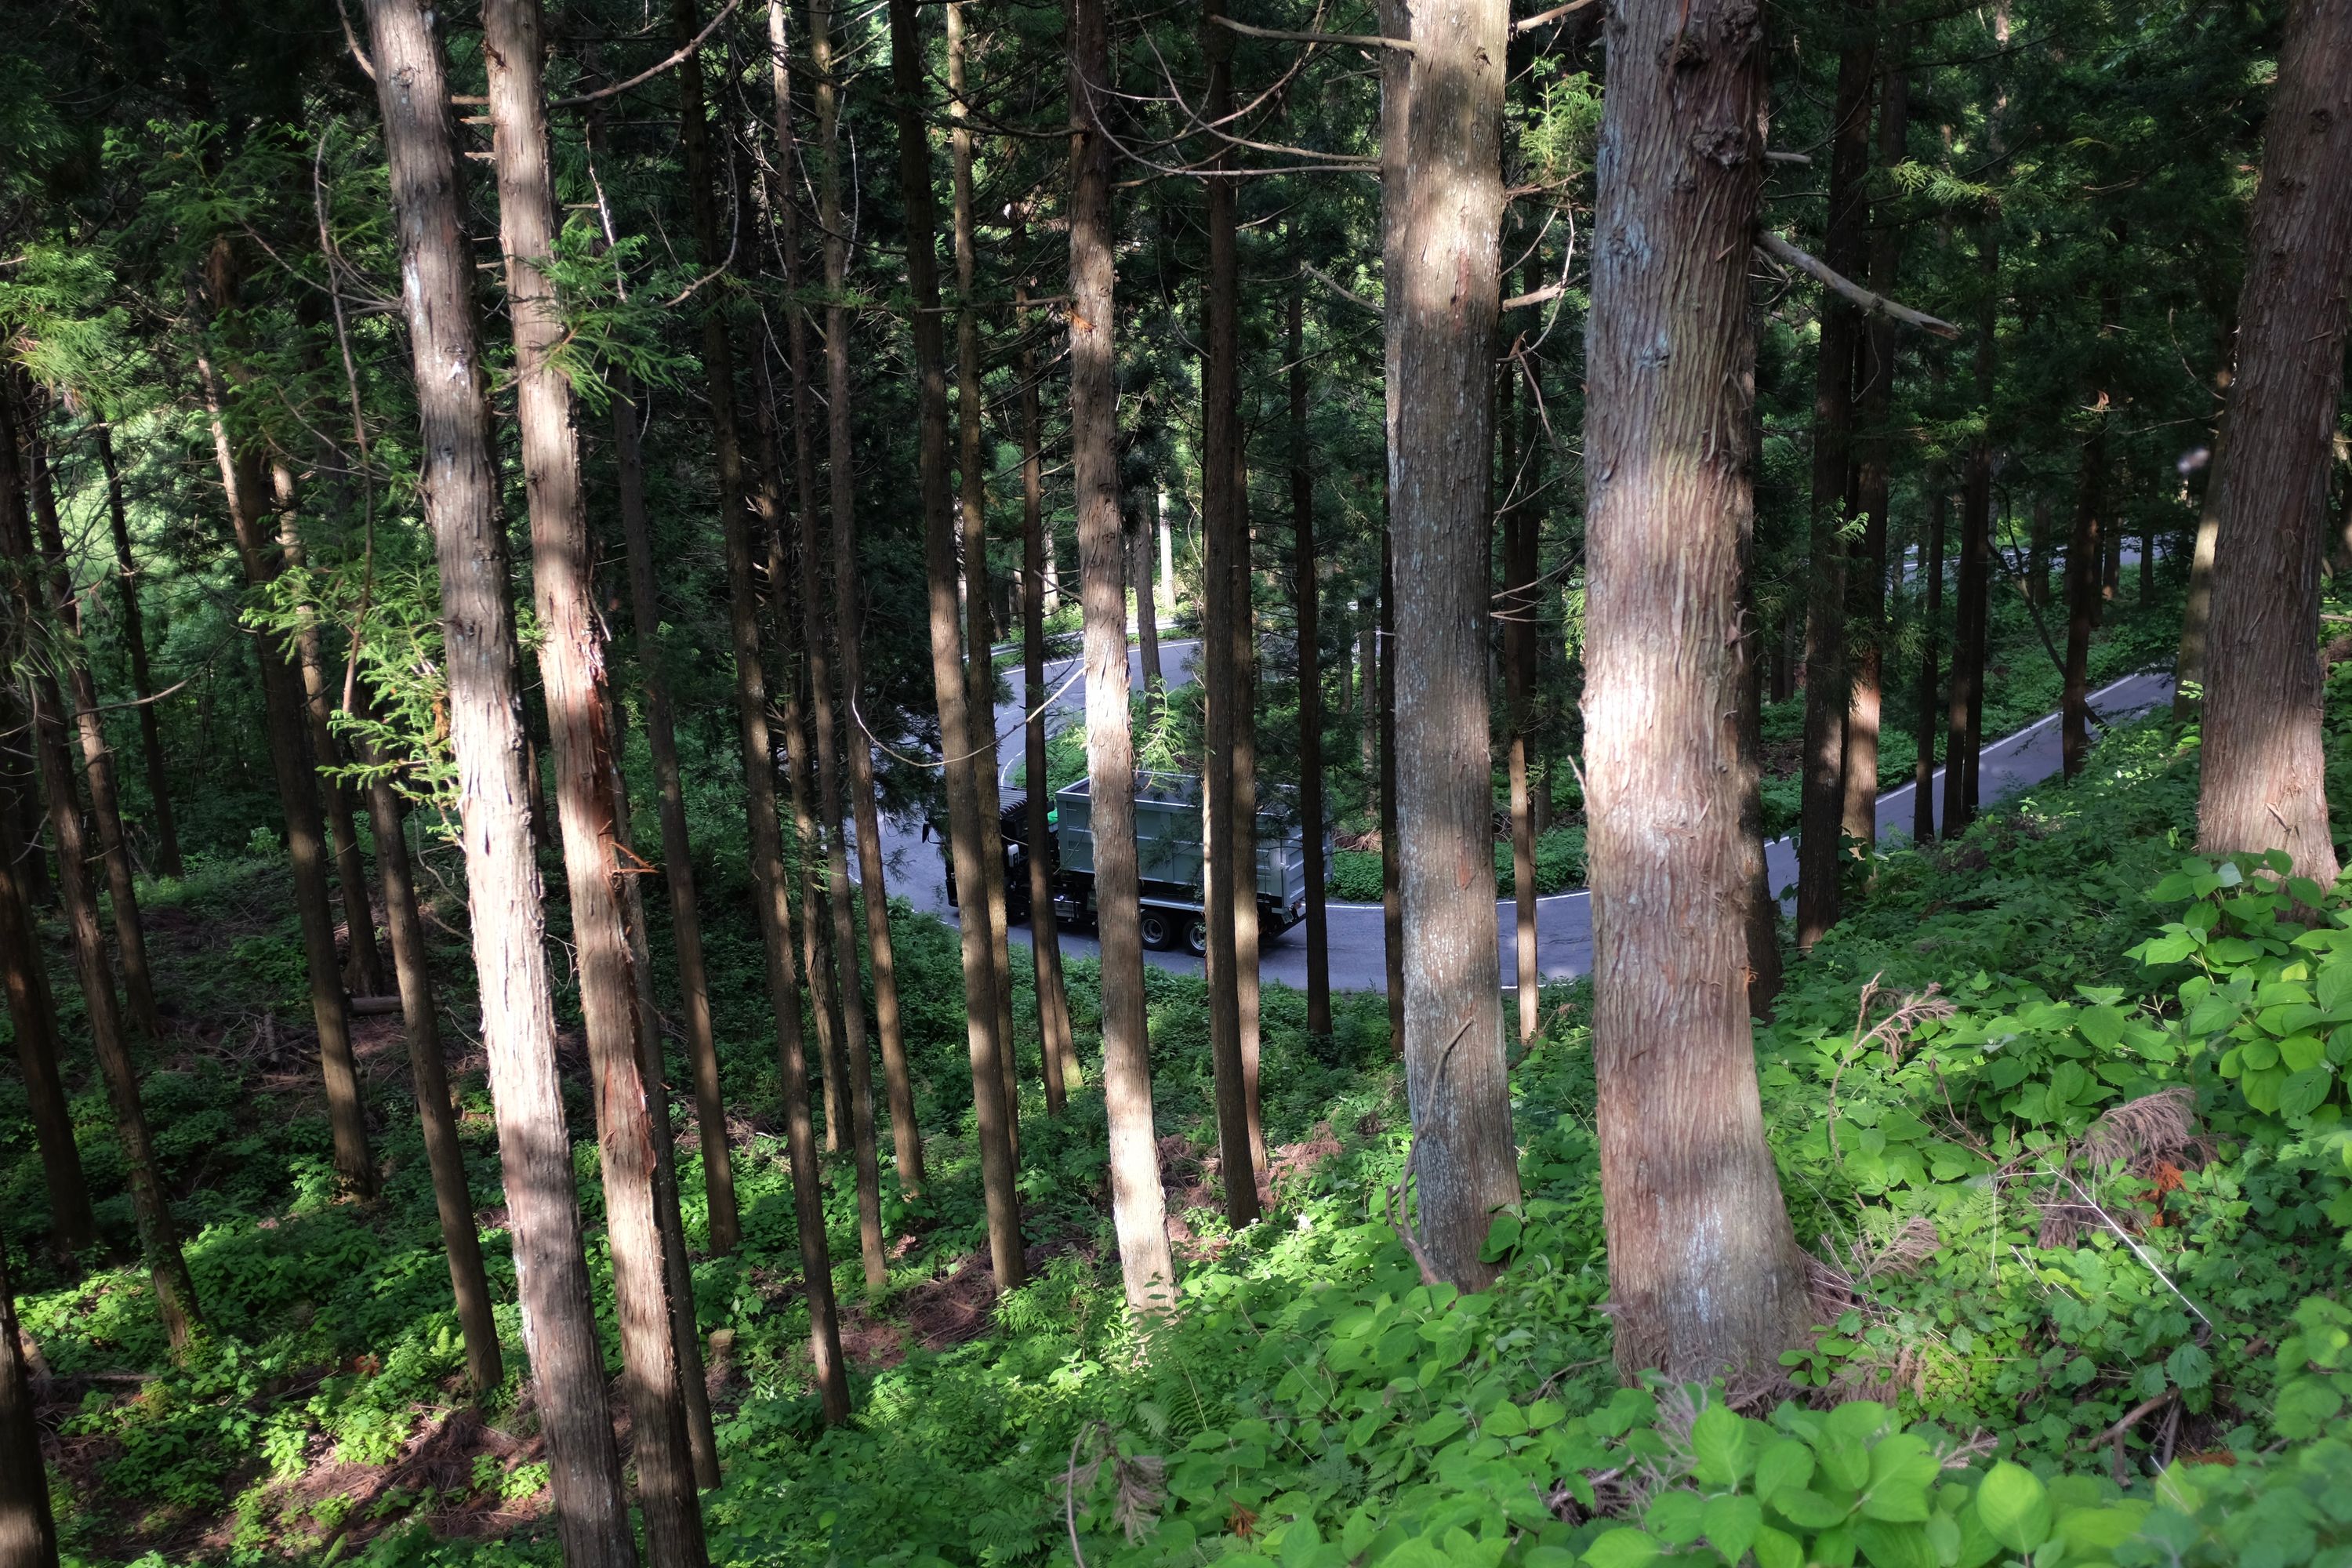 A truck drives on a mountain road in a thick forest.